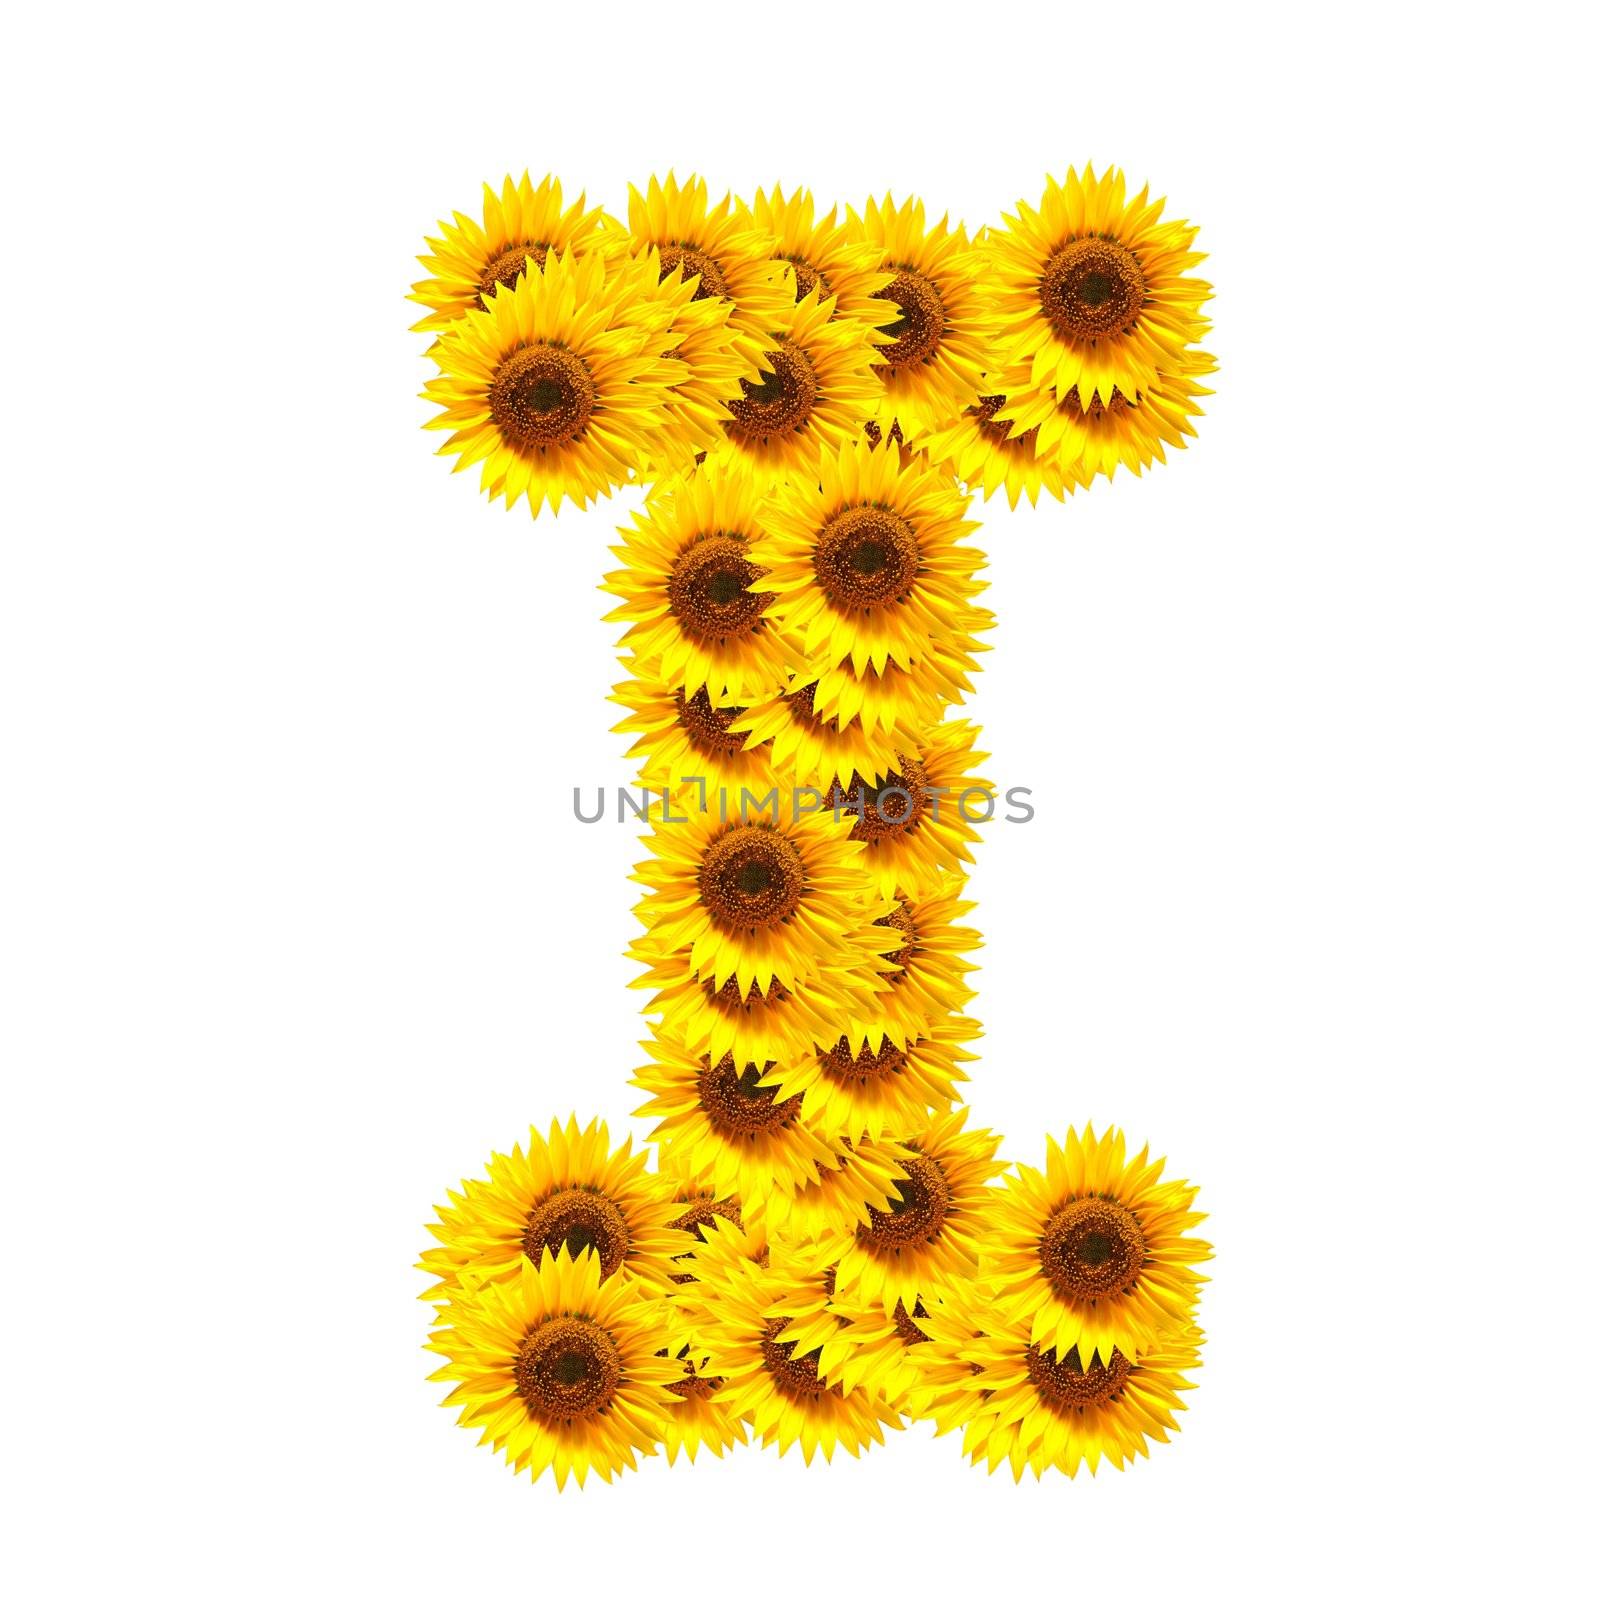 flower alphabet and numbers with sunflowers isolated on white background